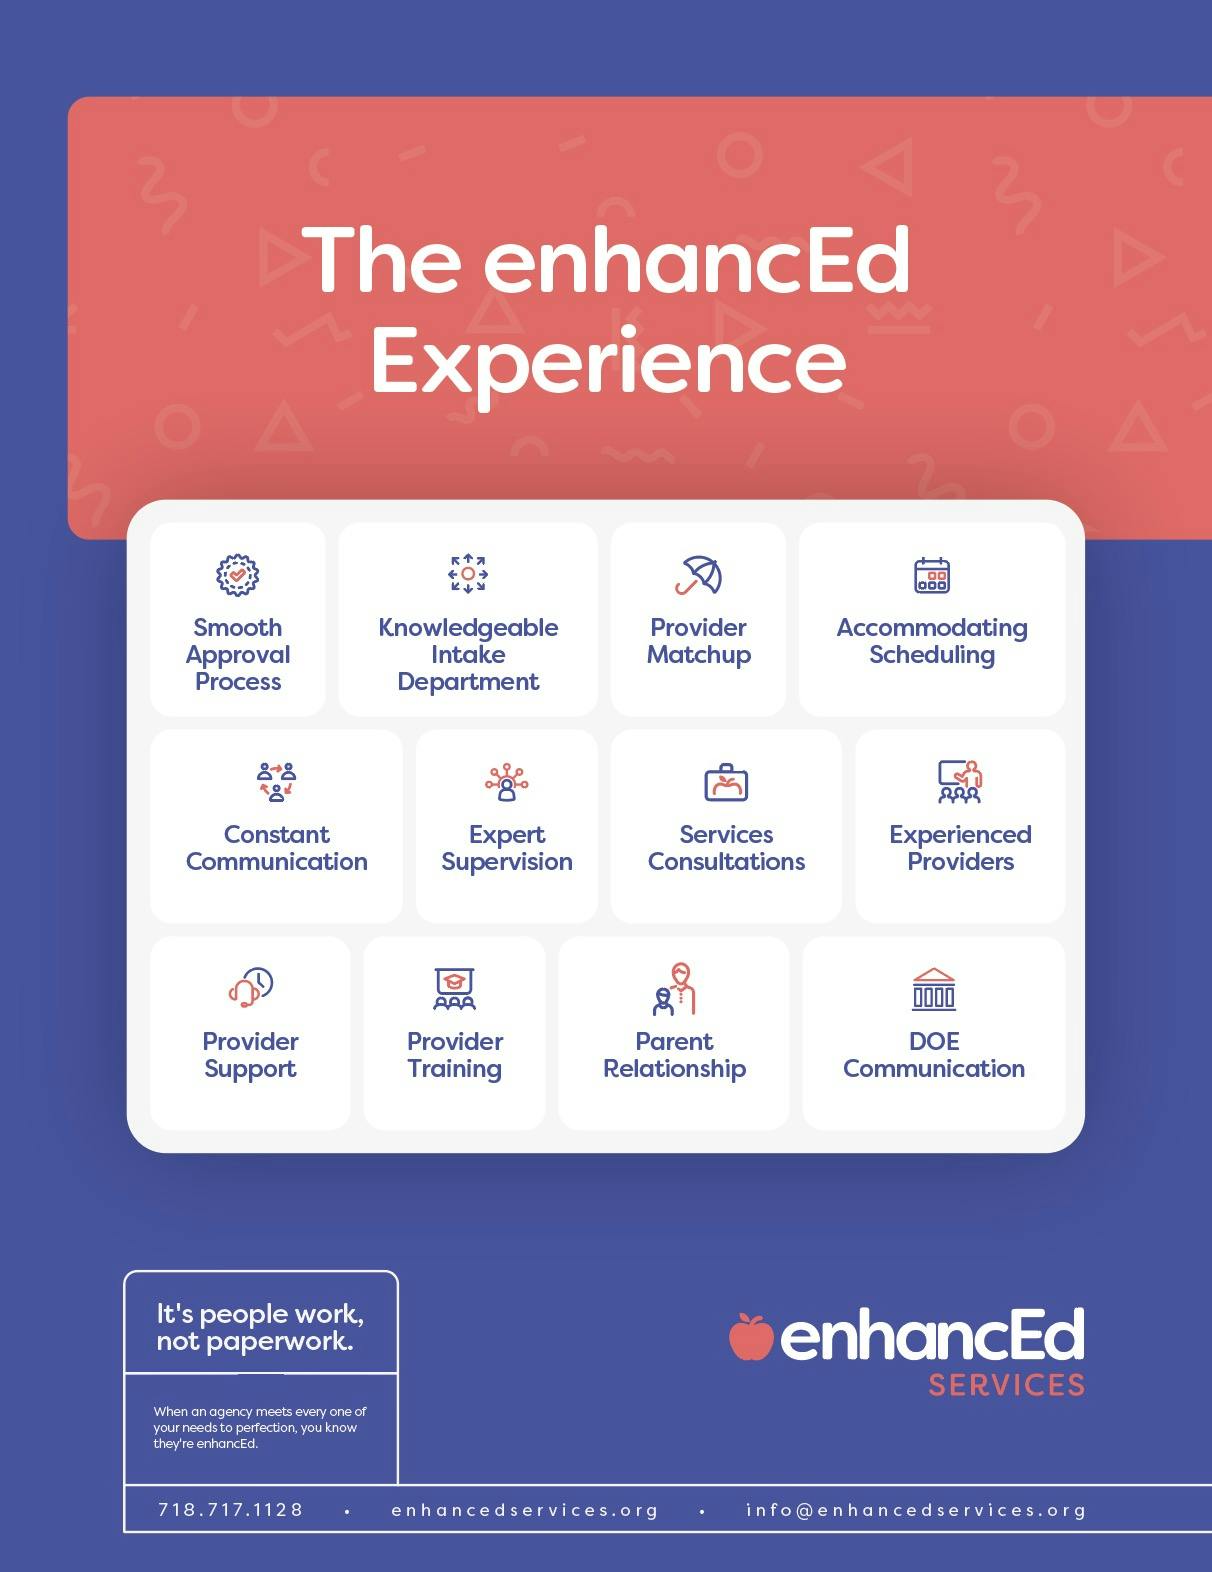 advertisement that says The Enhanced Experience. and a list of services like Providor Training and P3 and ABA.